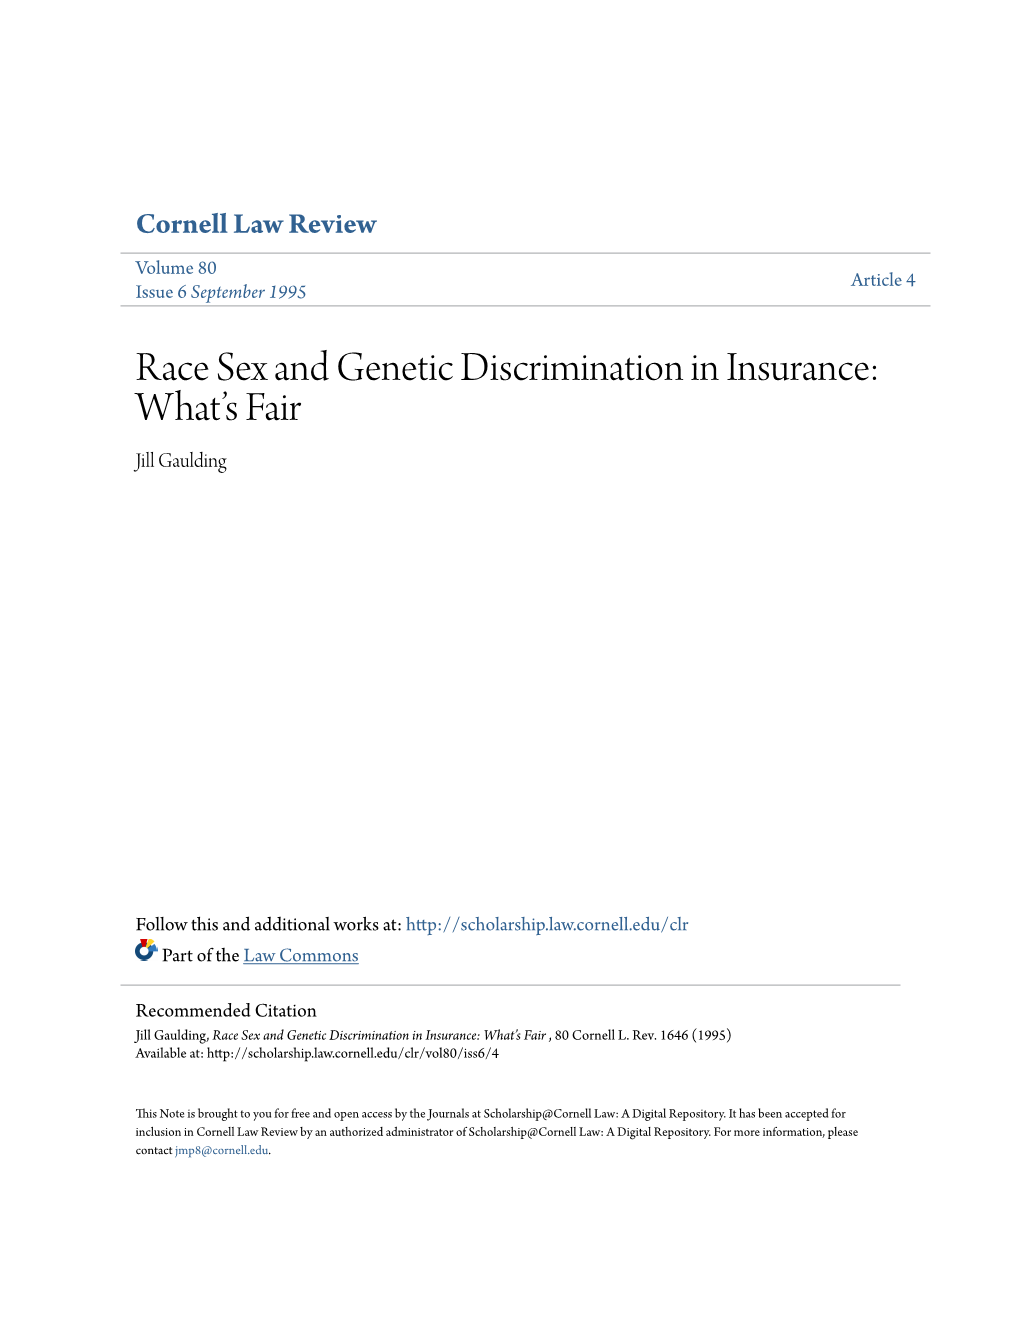 Race Sex and Genetic Discrimination in Insurance: What’S Fair Jill Gaulding